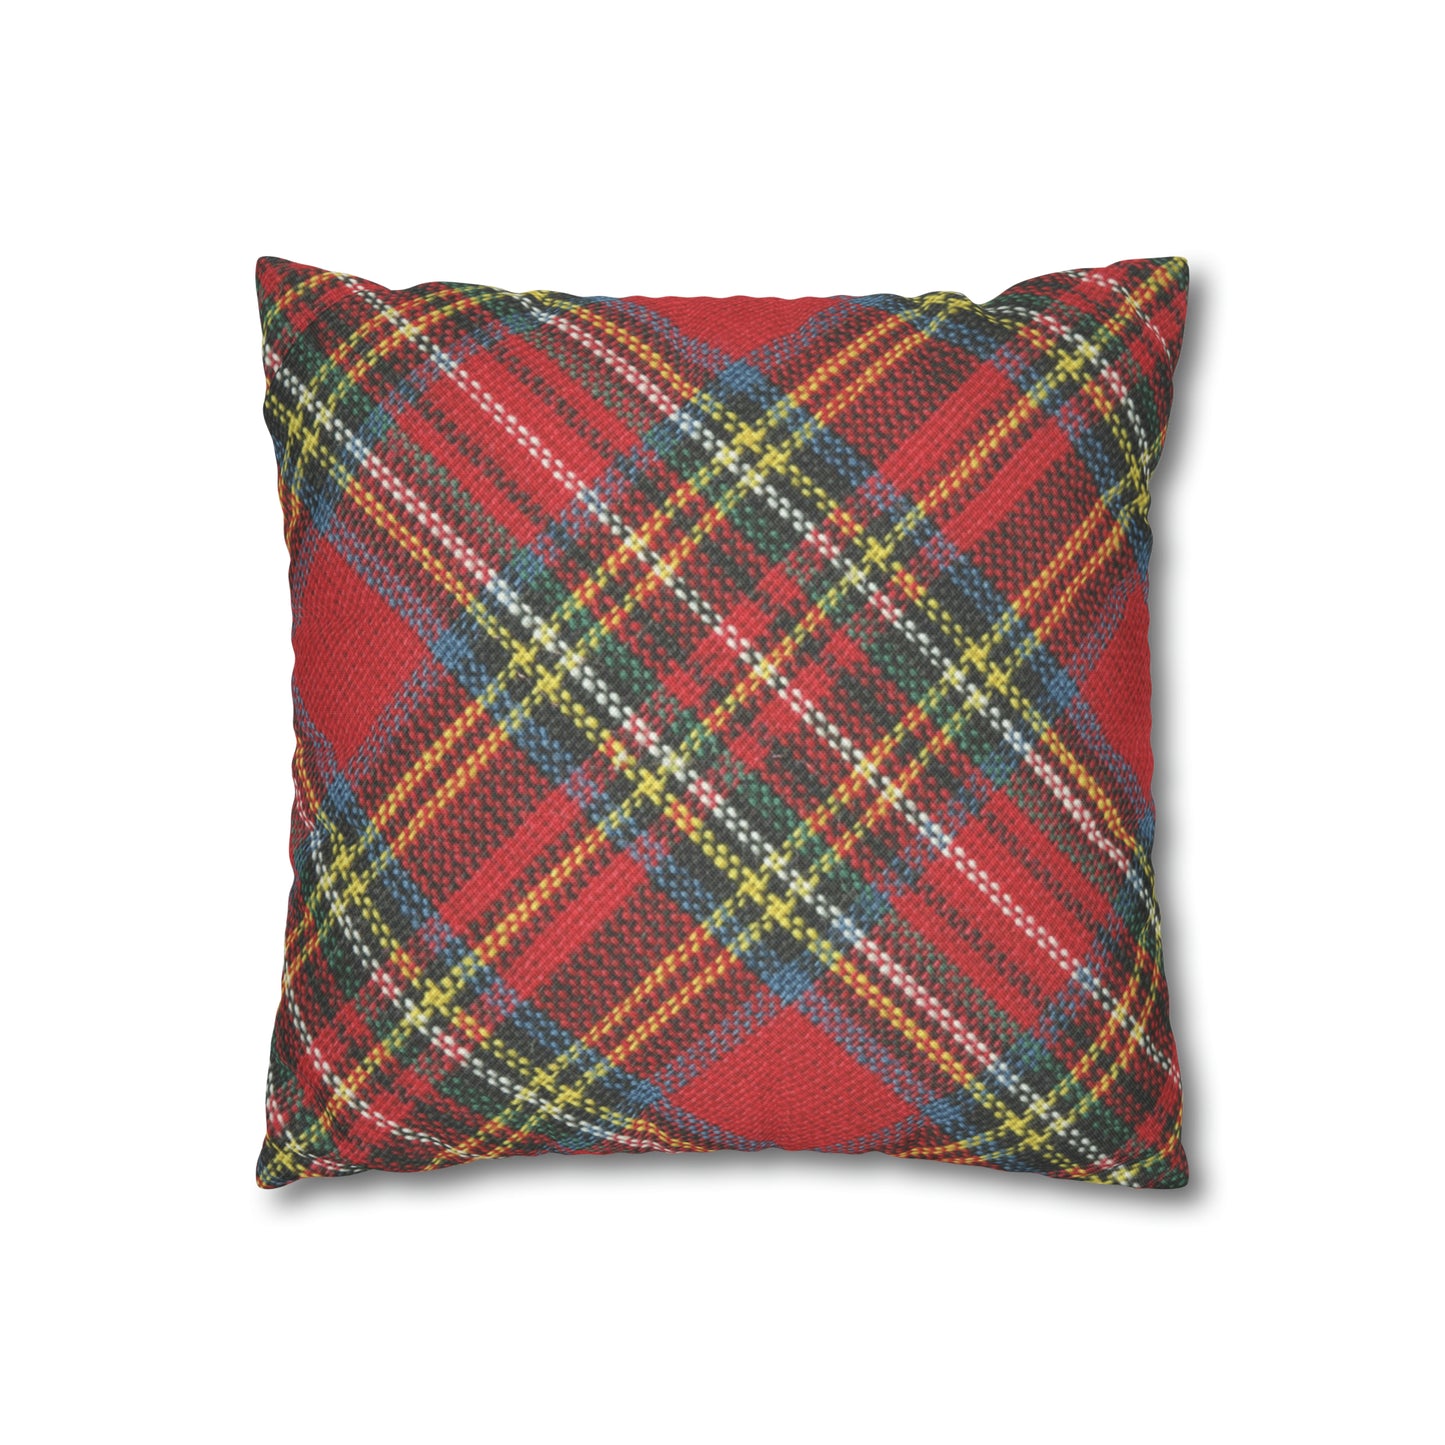 A Printify red-plaid pillow case, American made for easy-care.